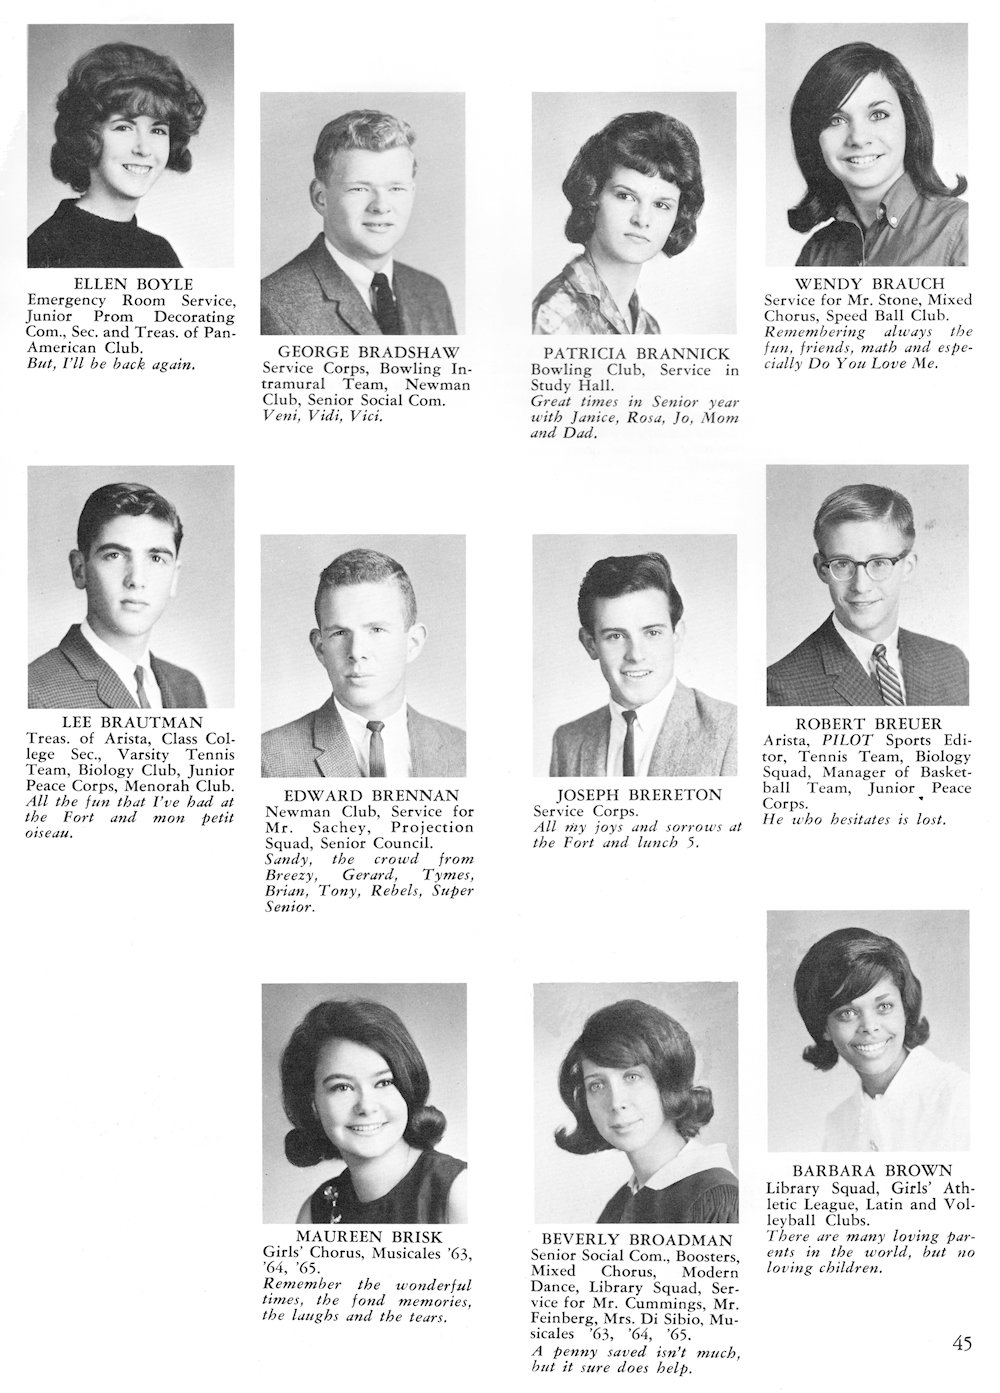 Boyle-Brown page from Fort Hamilton High School 1965